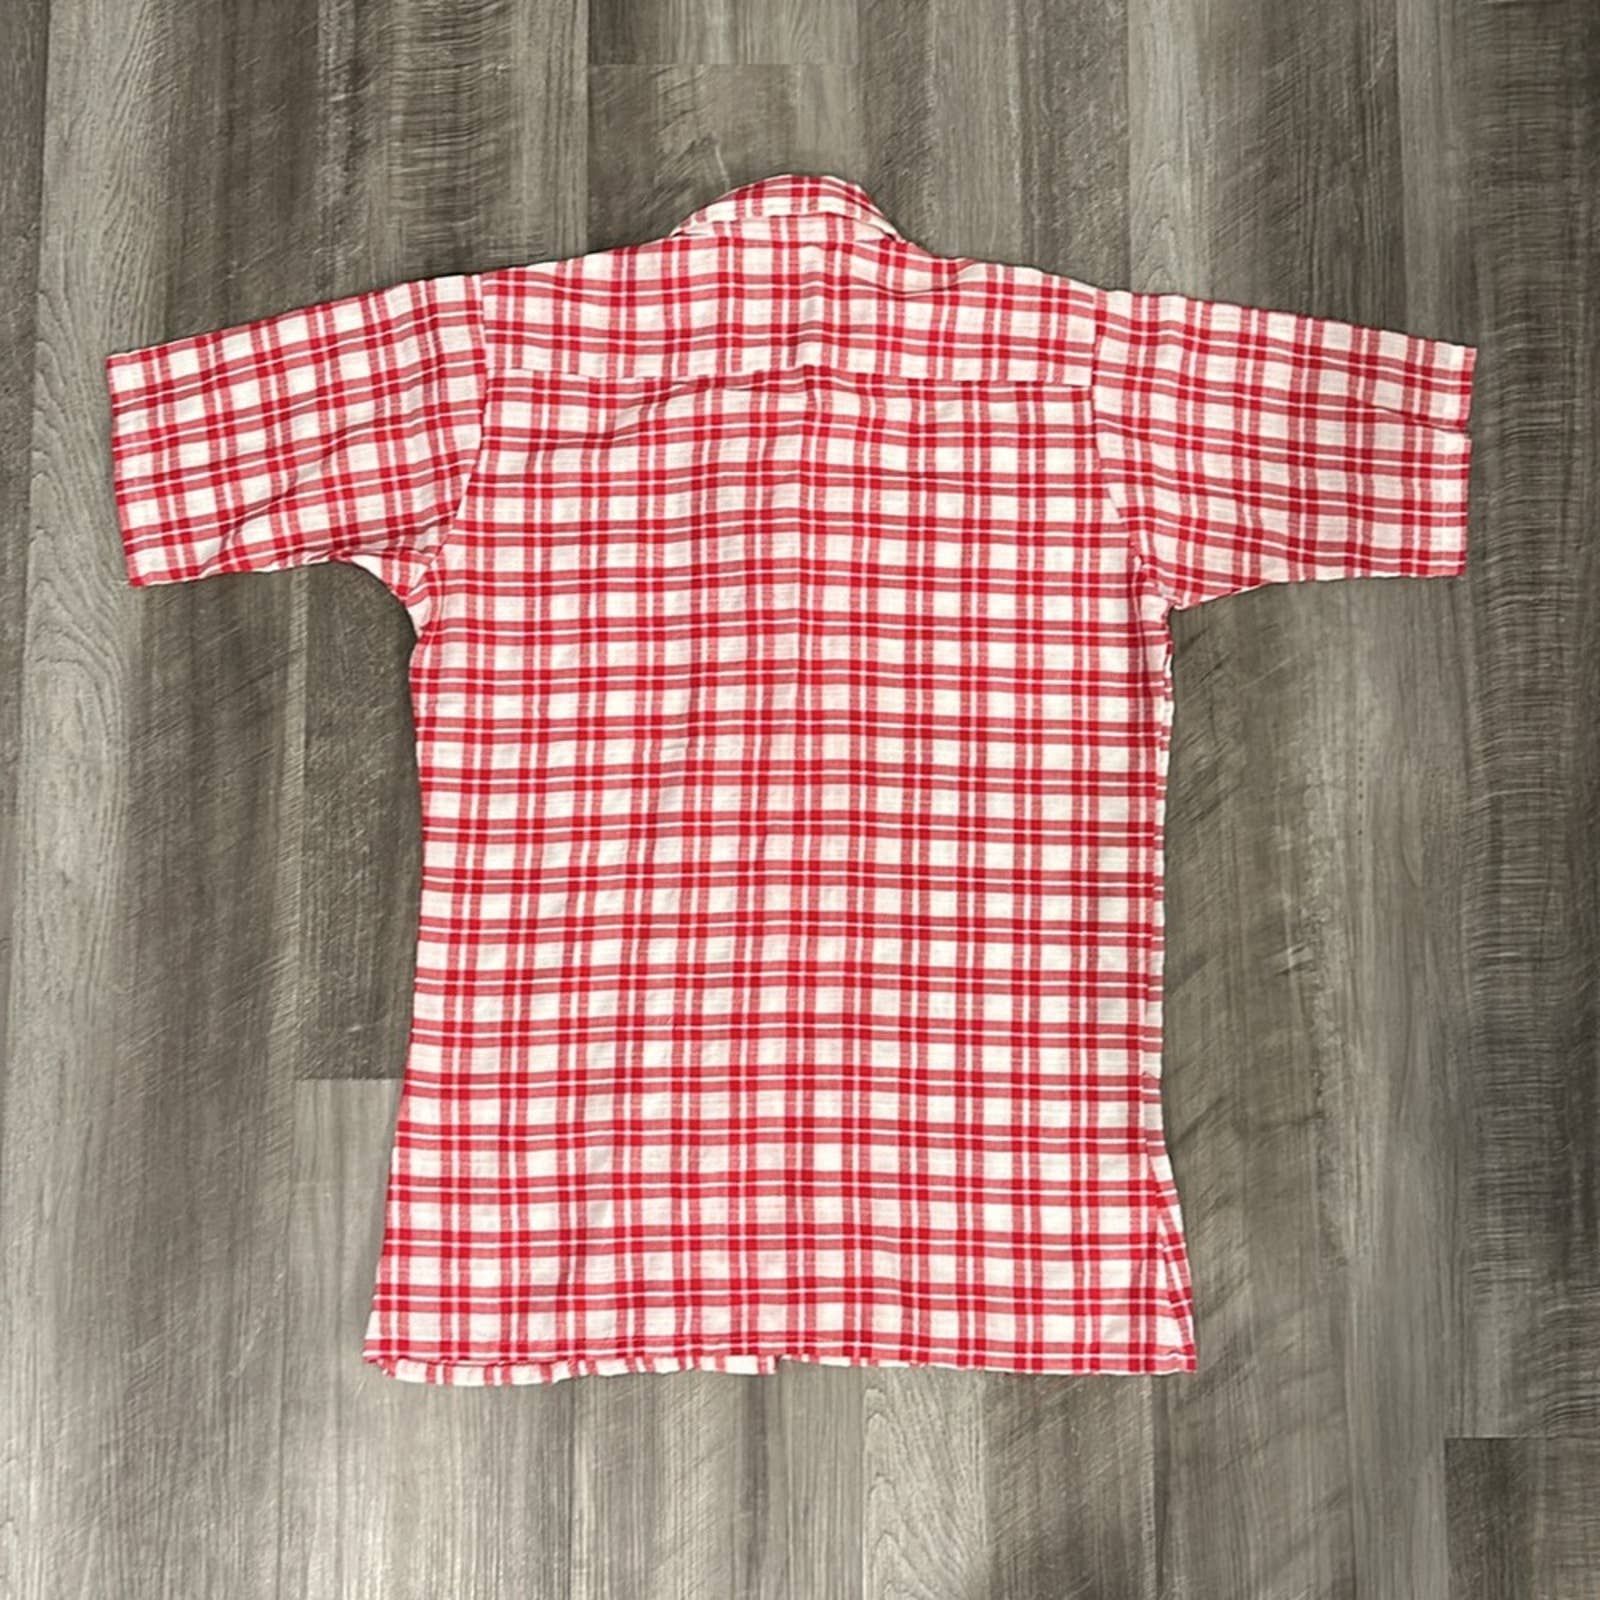 1 Plaza Square by Ely and Walker Western Short Sleeve Size US S / EU 44-46 / 1 - 3 Thumbnail